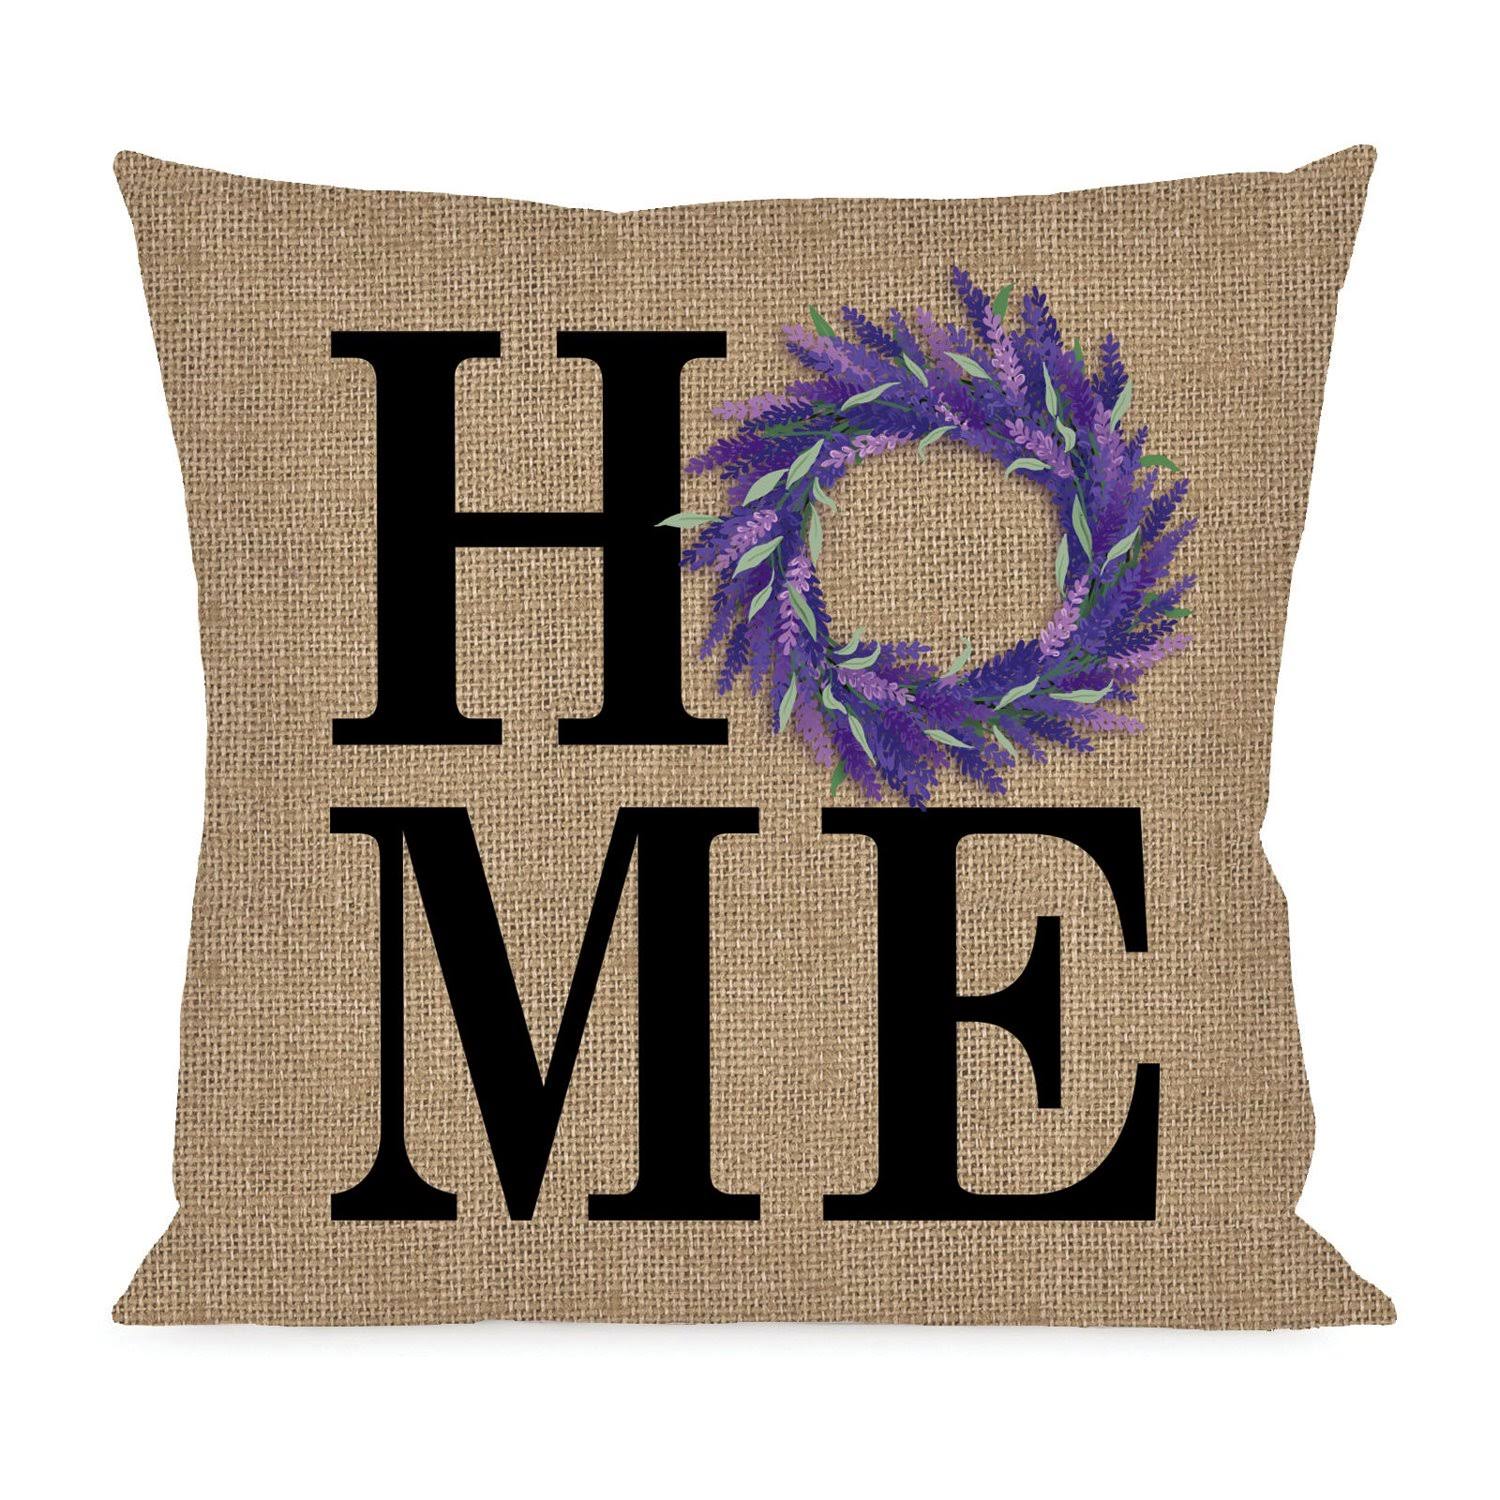 Evergreen Black & Lavender 'Home' Gingham Reversible Pillow Cover One-Size